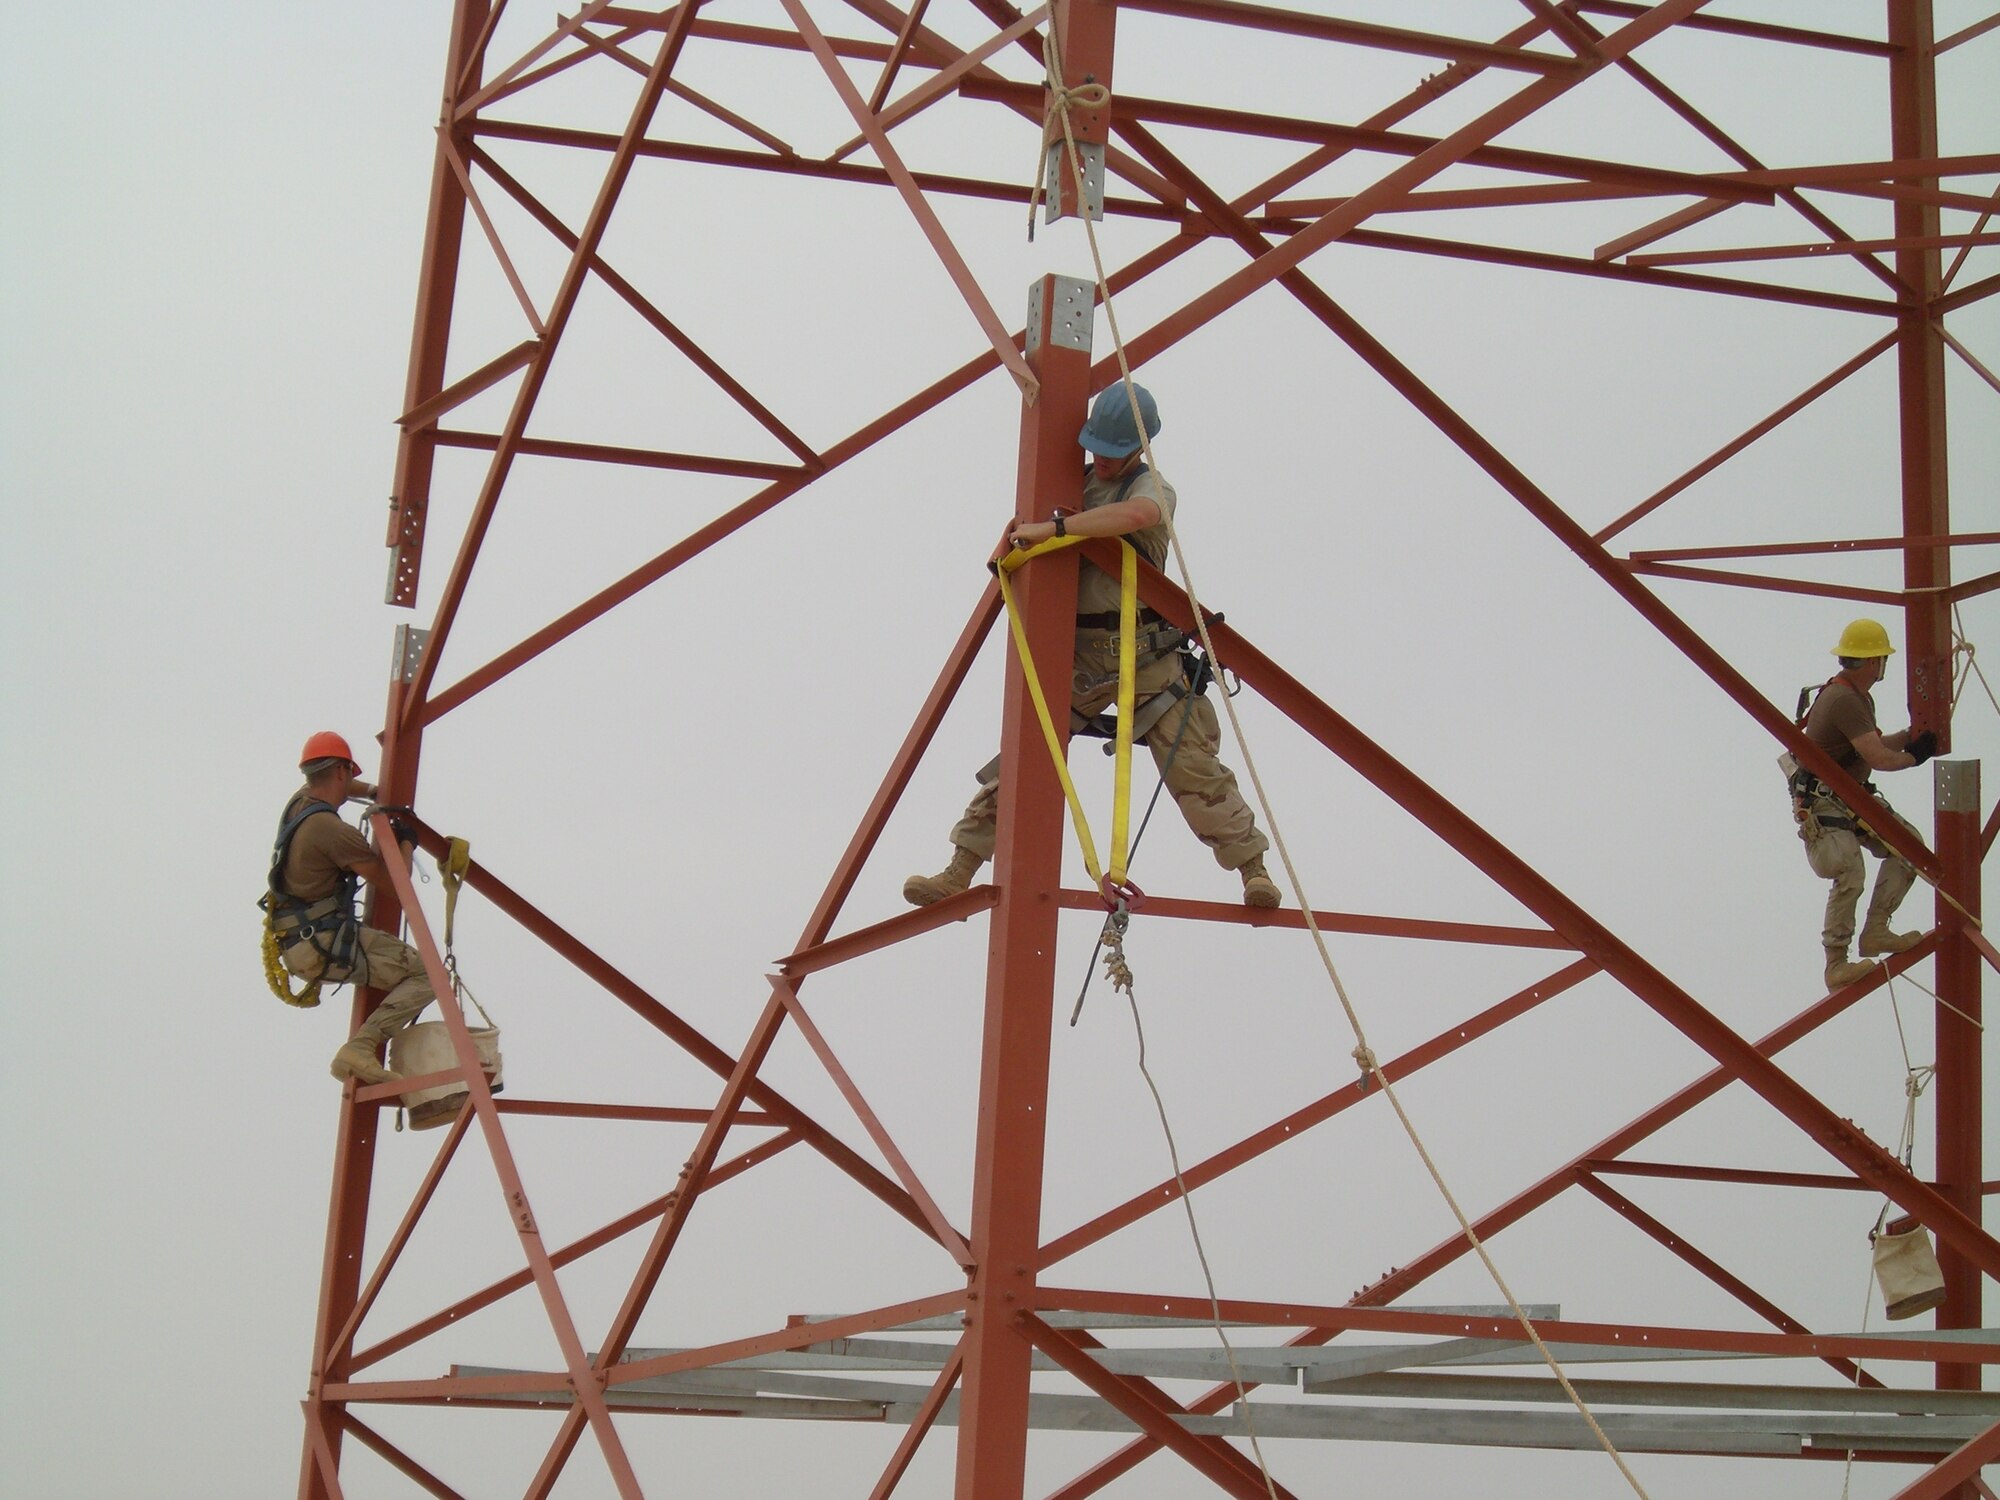 SOUTHWEST ASIA -- Members of the Central Command Air Forces RIPRNet Special Maintenance Team work to install a portion of a communications tower at Ali Air Base, Iraq. The tower is part of a core site for the Radio over Internet Protocol Routed network.
